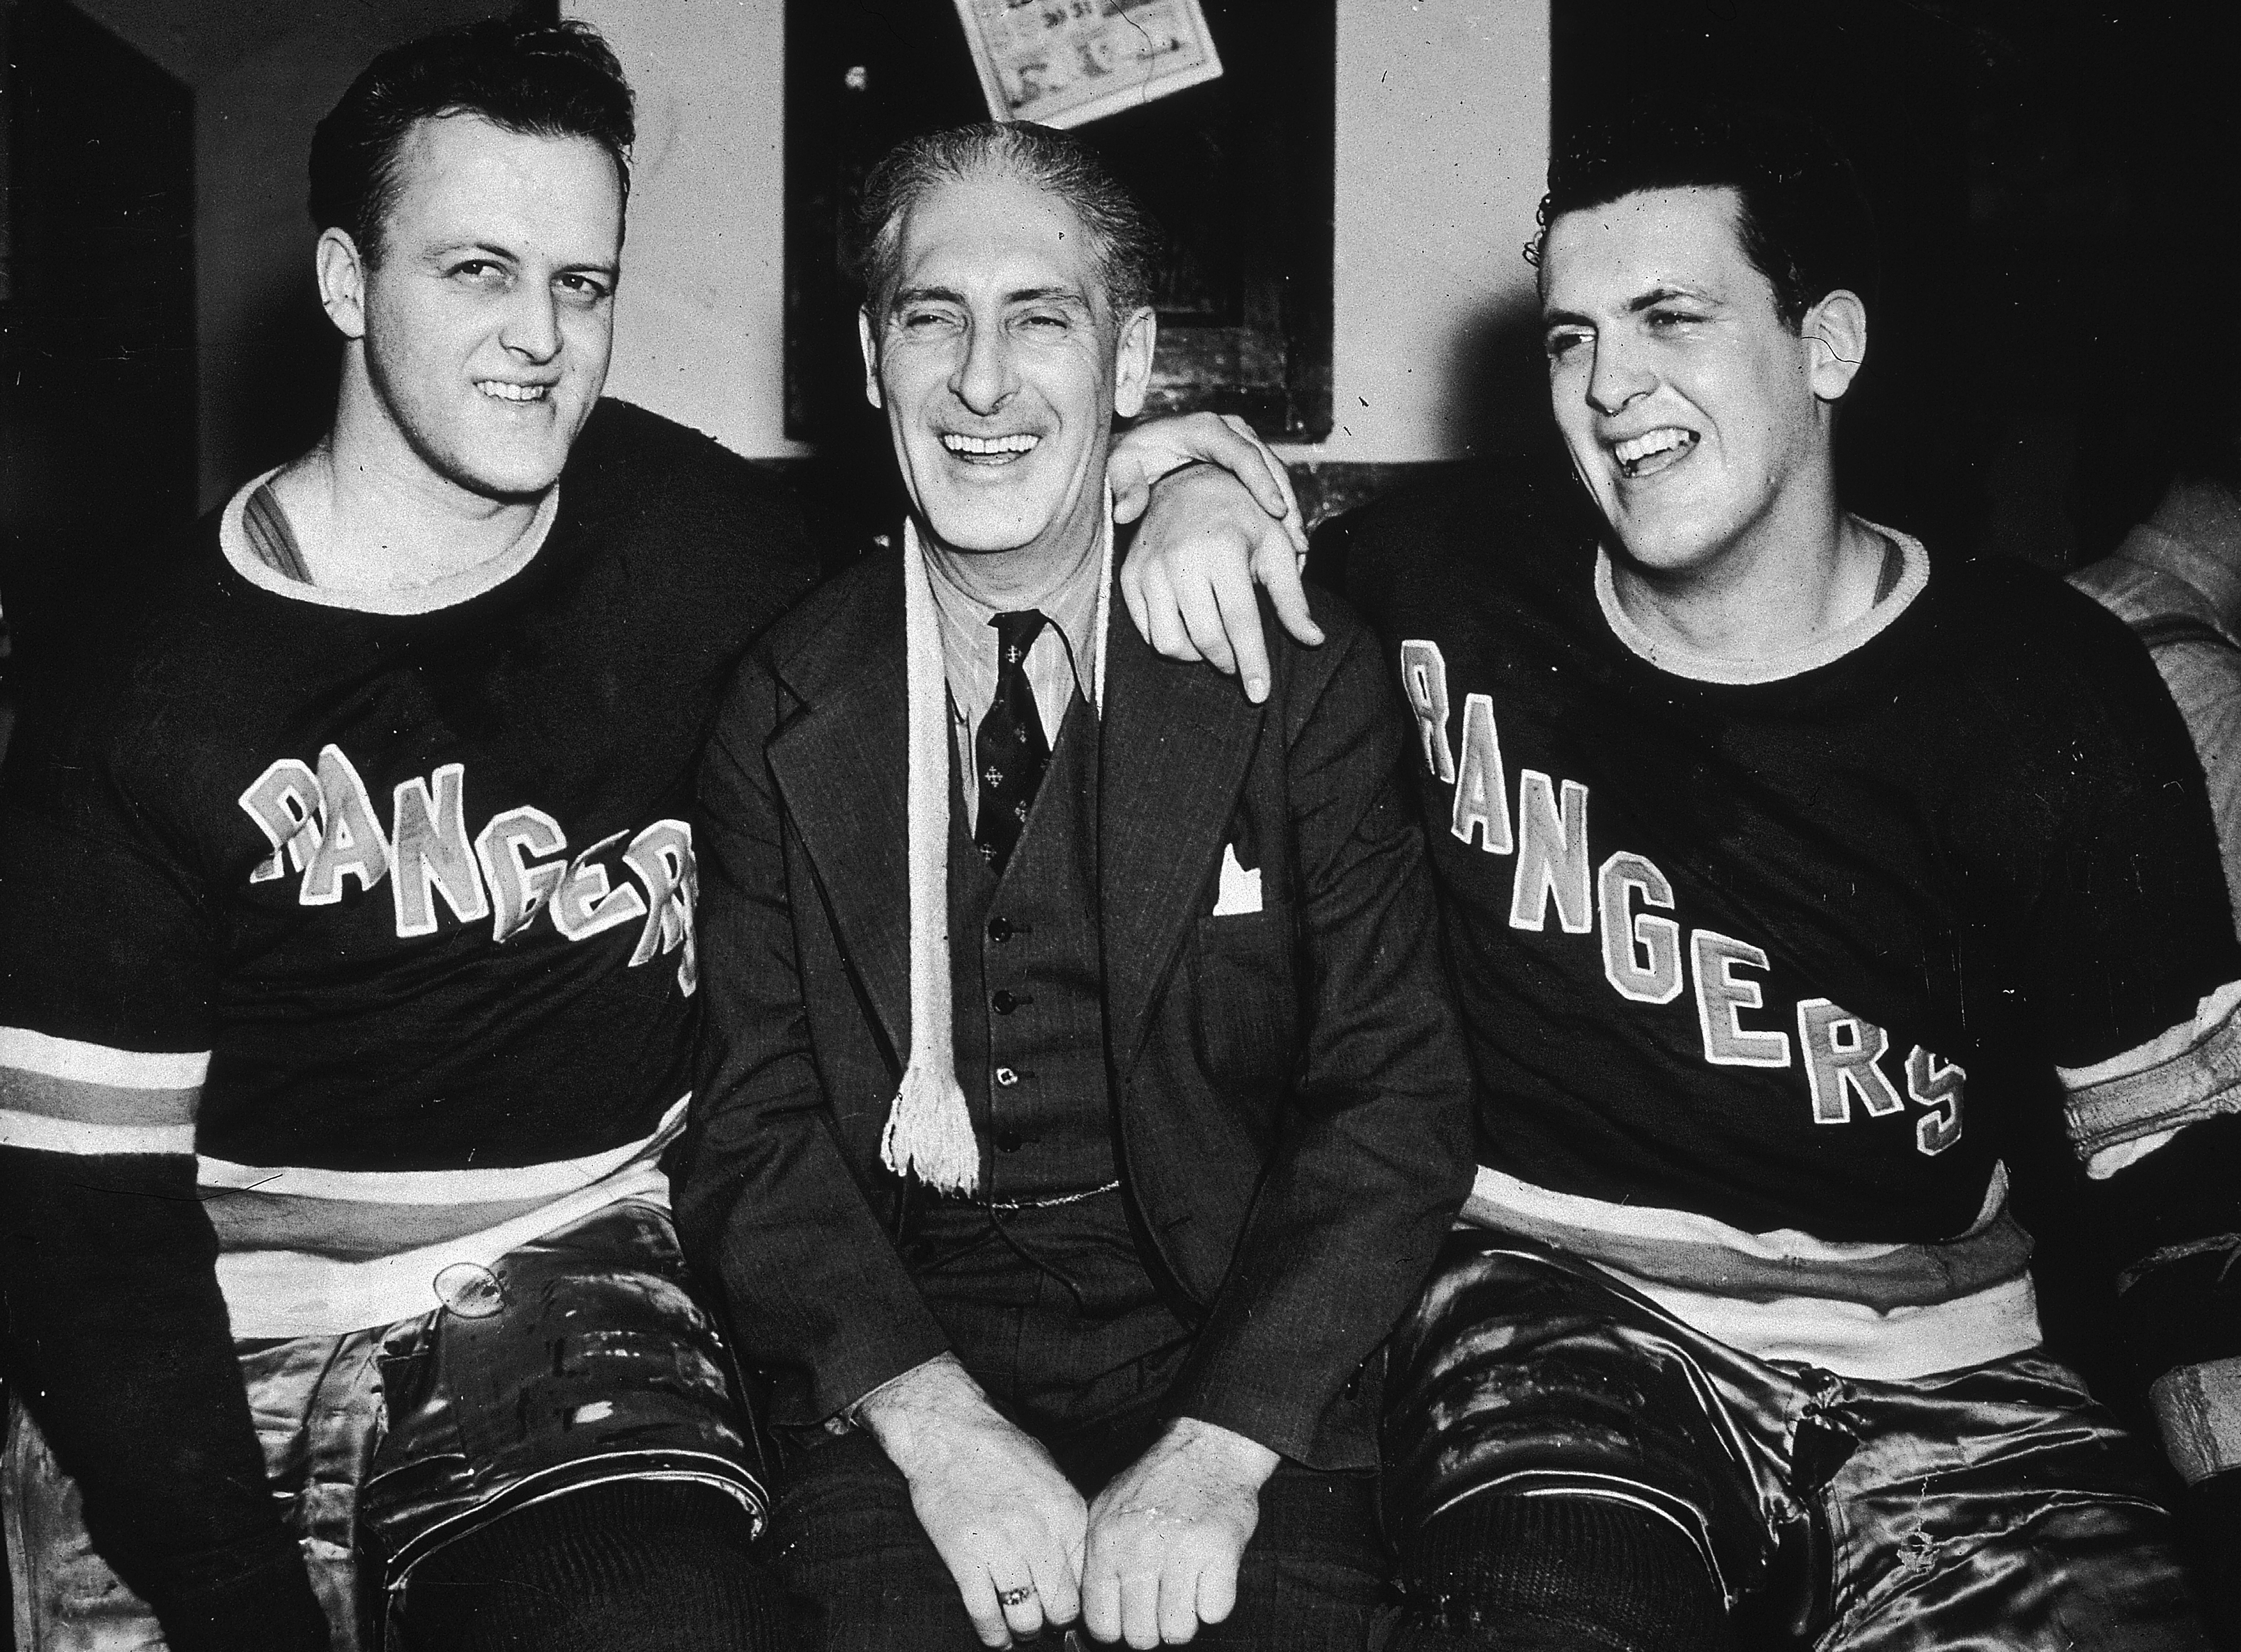 Circa 1940, New York Rangers hockey team manager Lester Patrick posing with his sons, Rangers players Lynn, left, and Muzz. (Photo by New York Times Co./Getty Images)